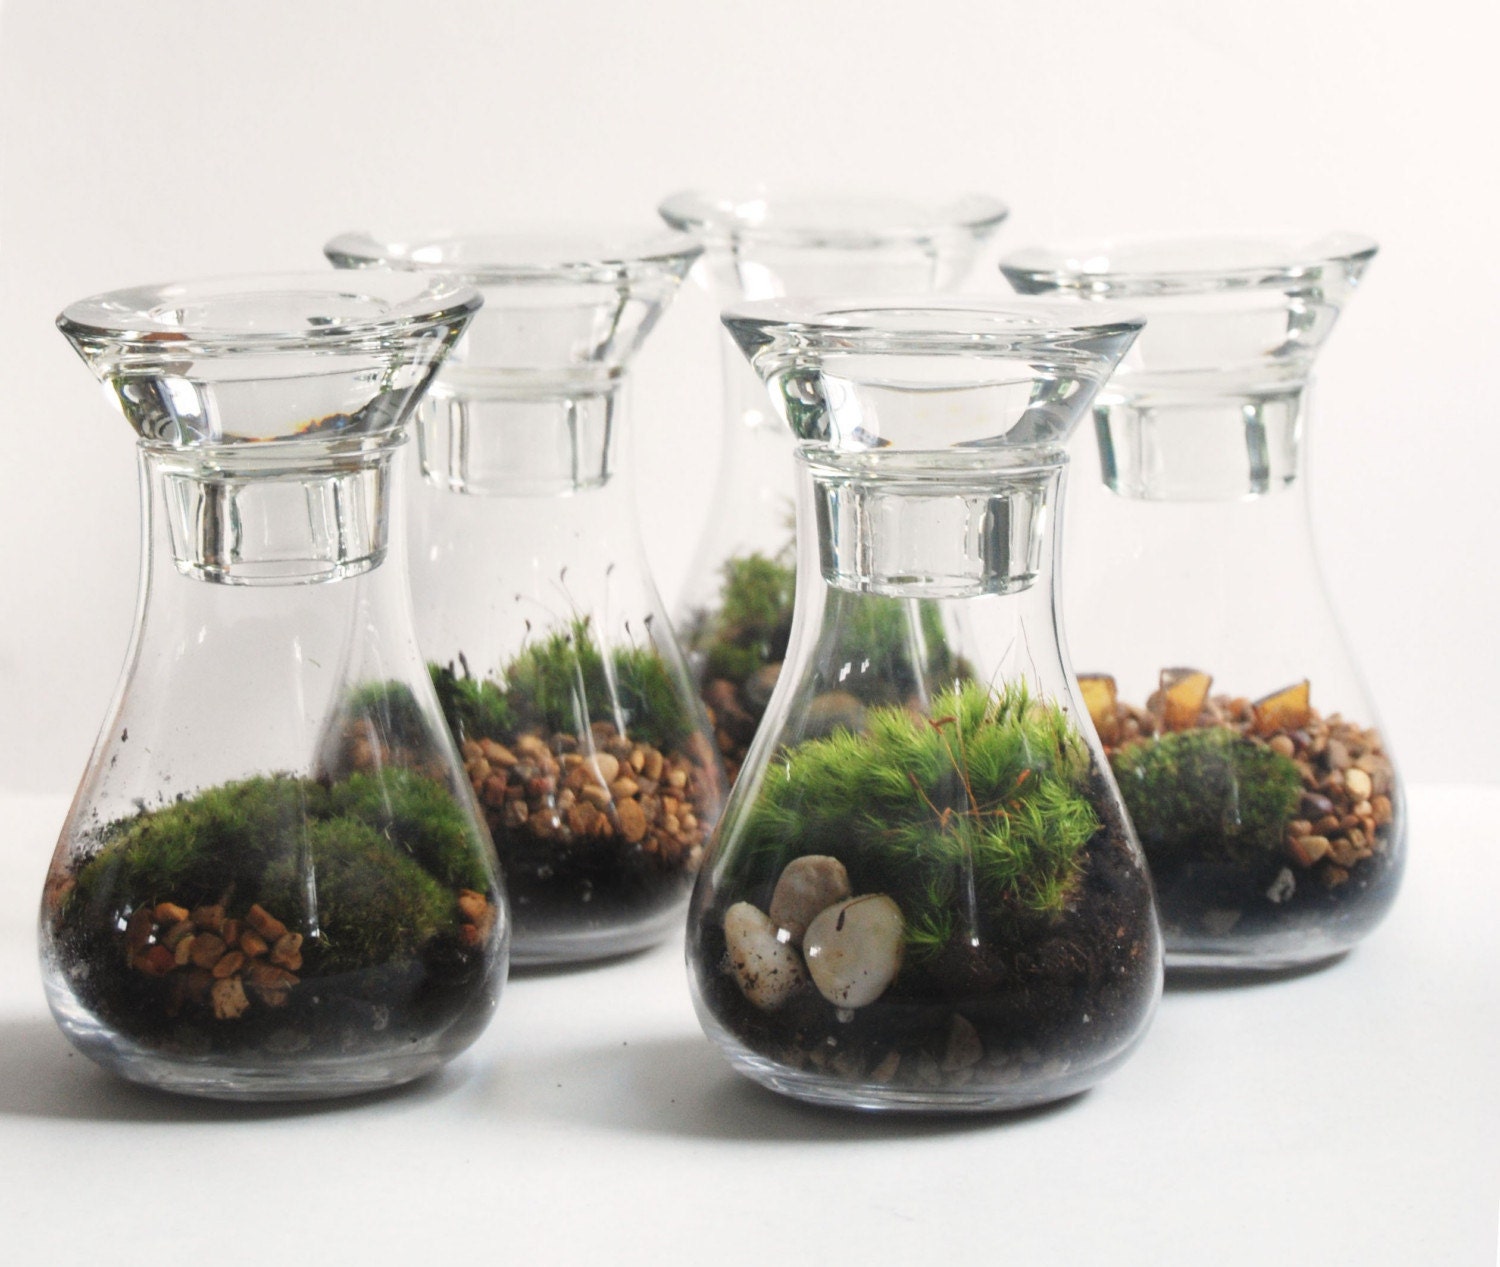 Live Moss Weddings Terrarium Available By Custom Order and Available Southeast Michigan/Toledo Area Only